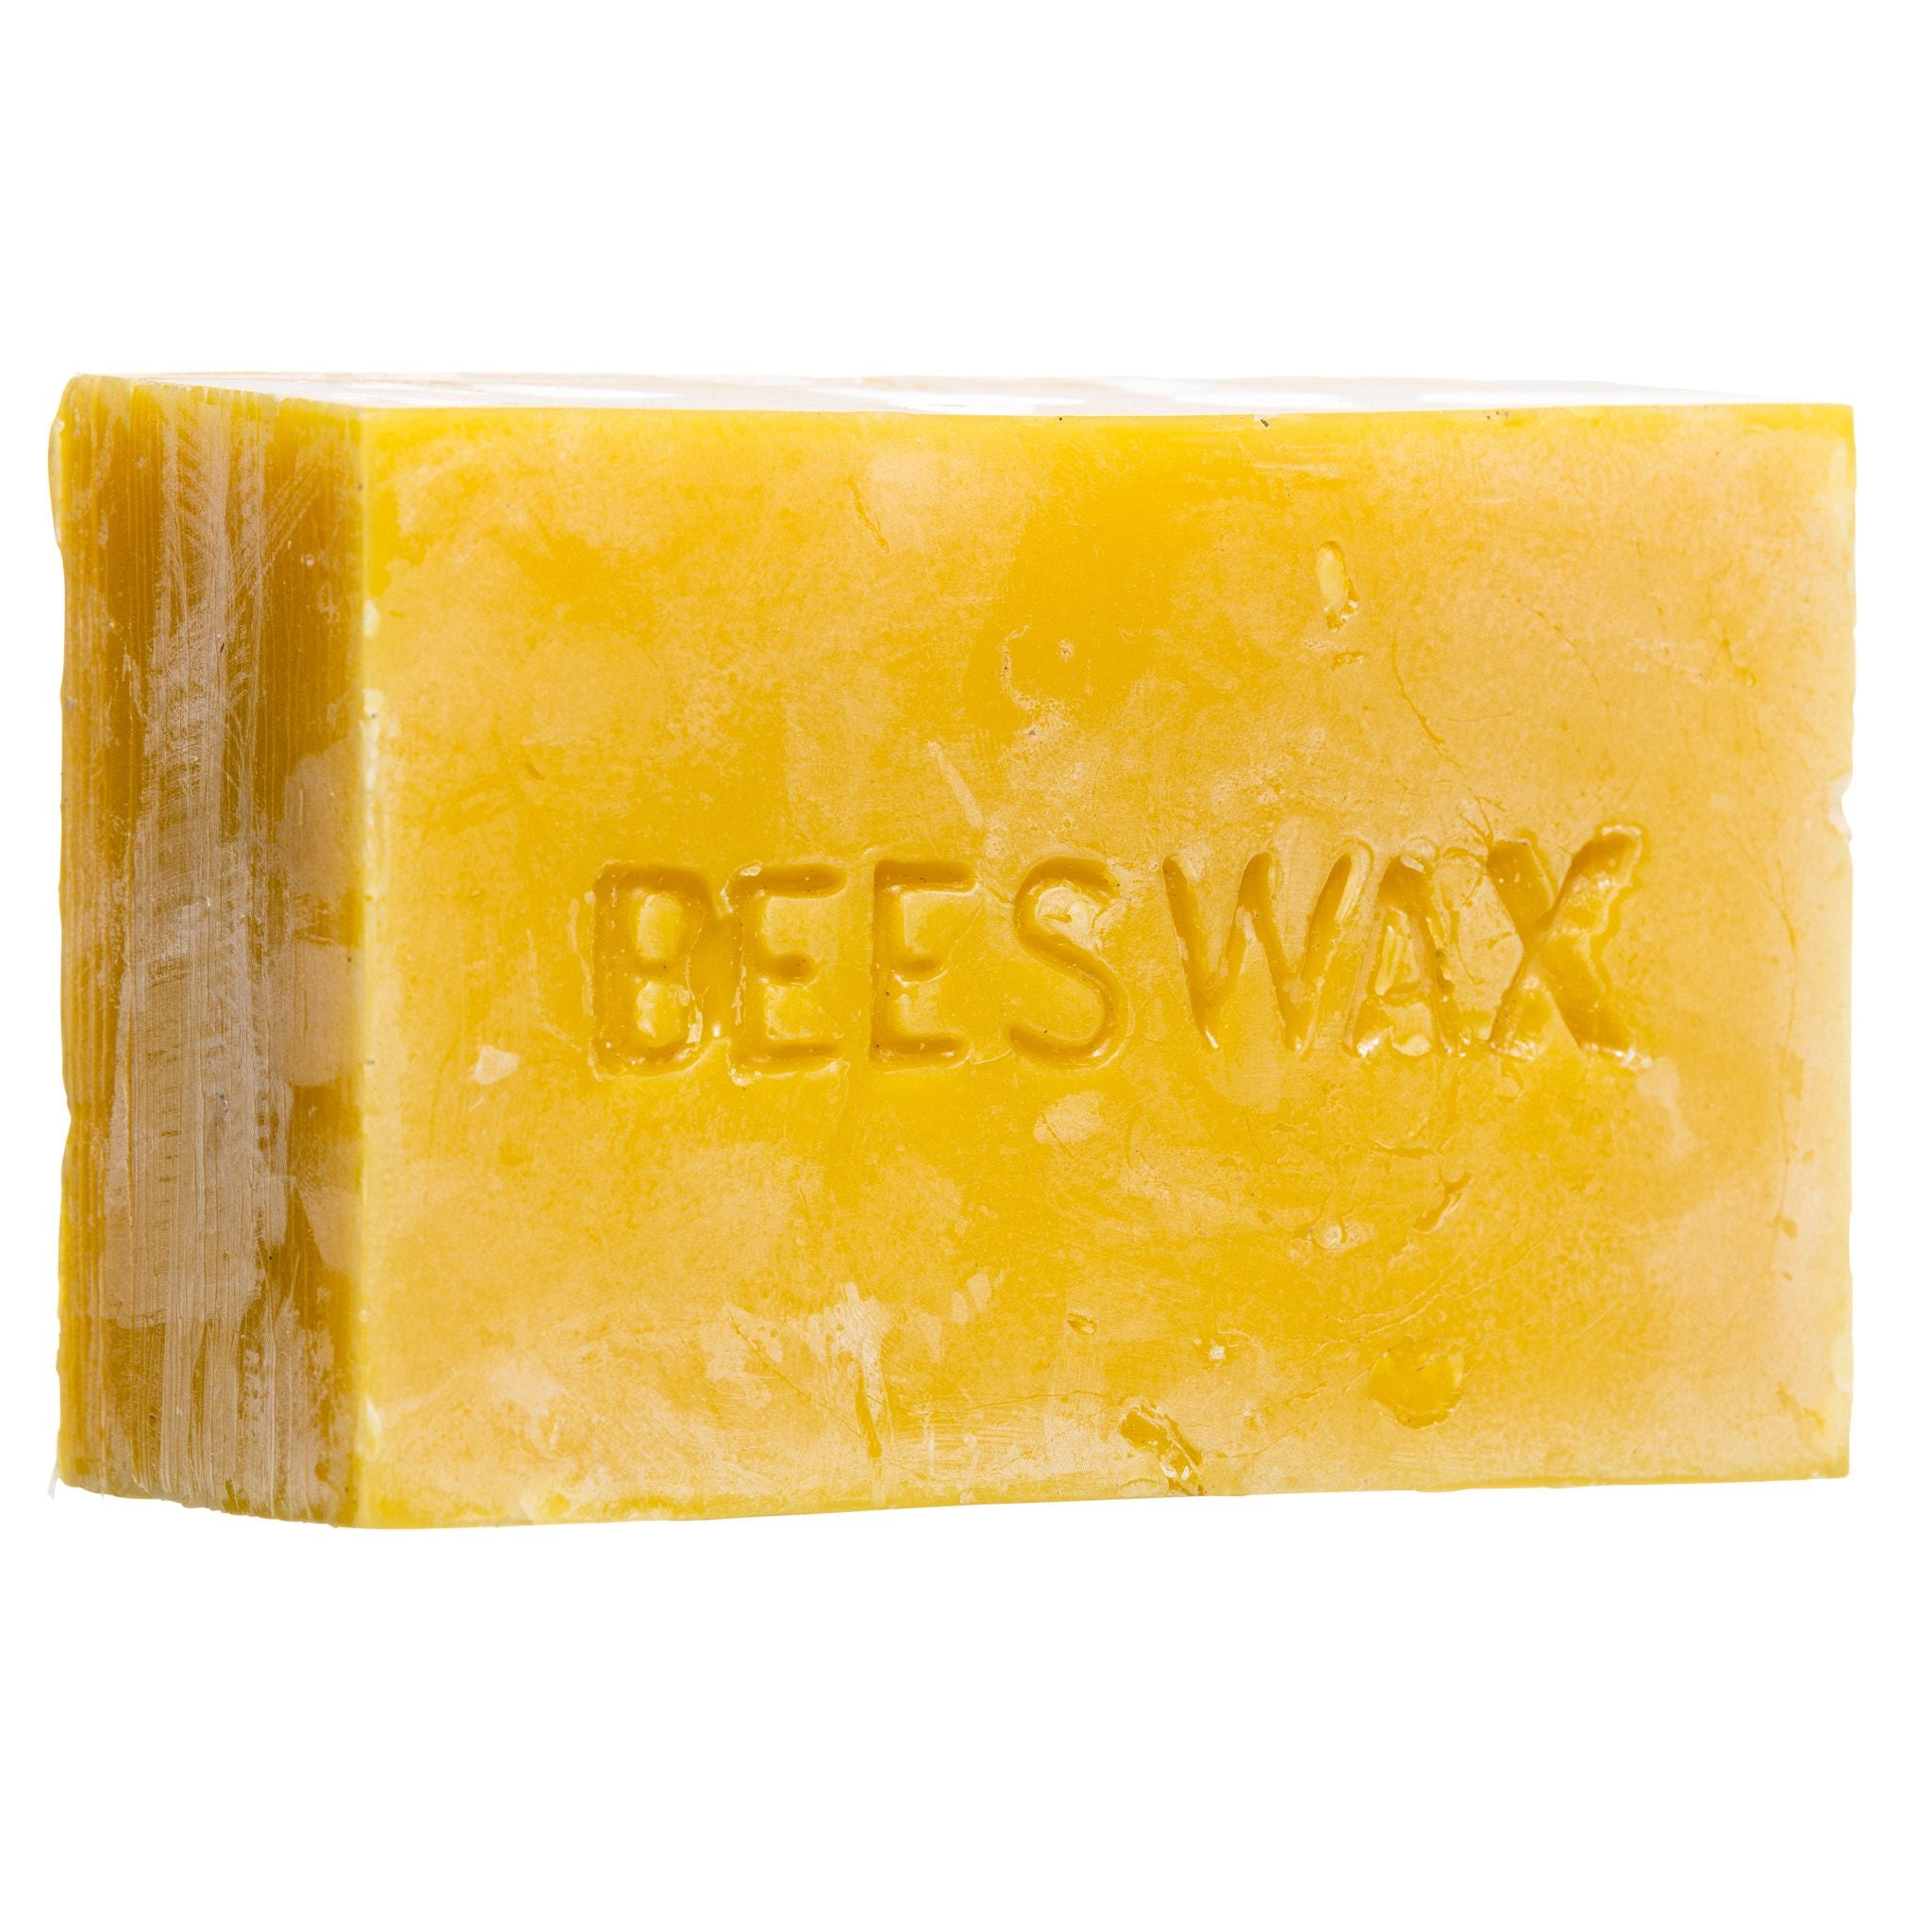 Wholesale raw material honey bee wax For Rejuvenating Your Body